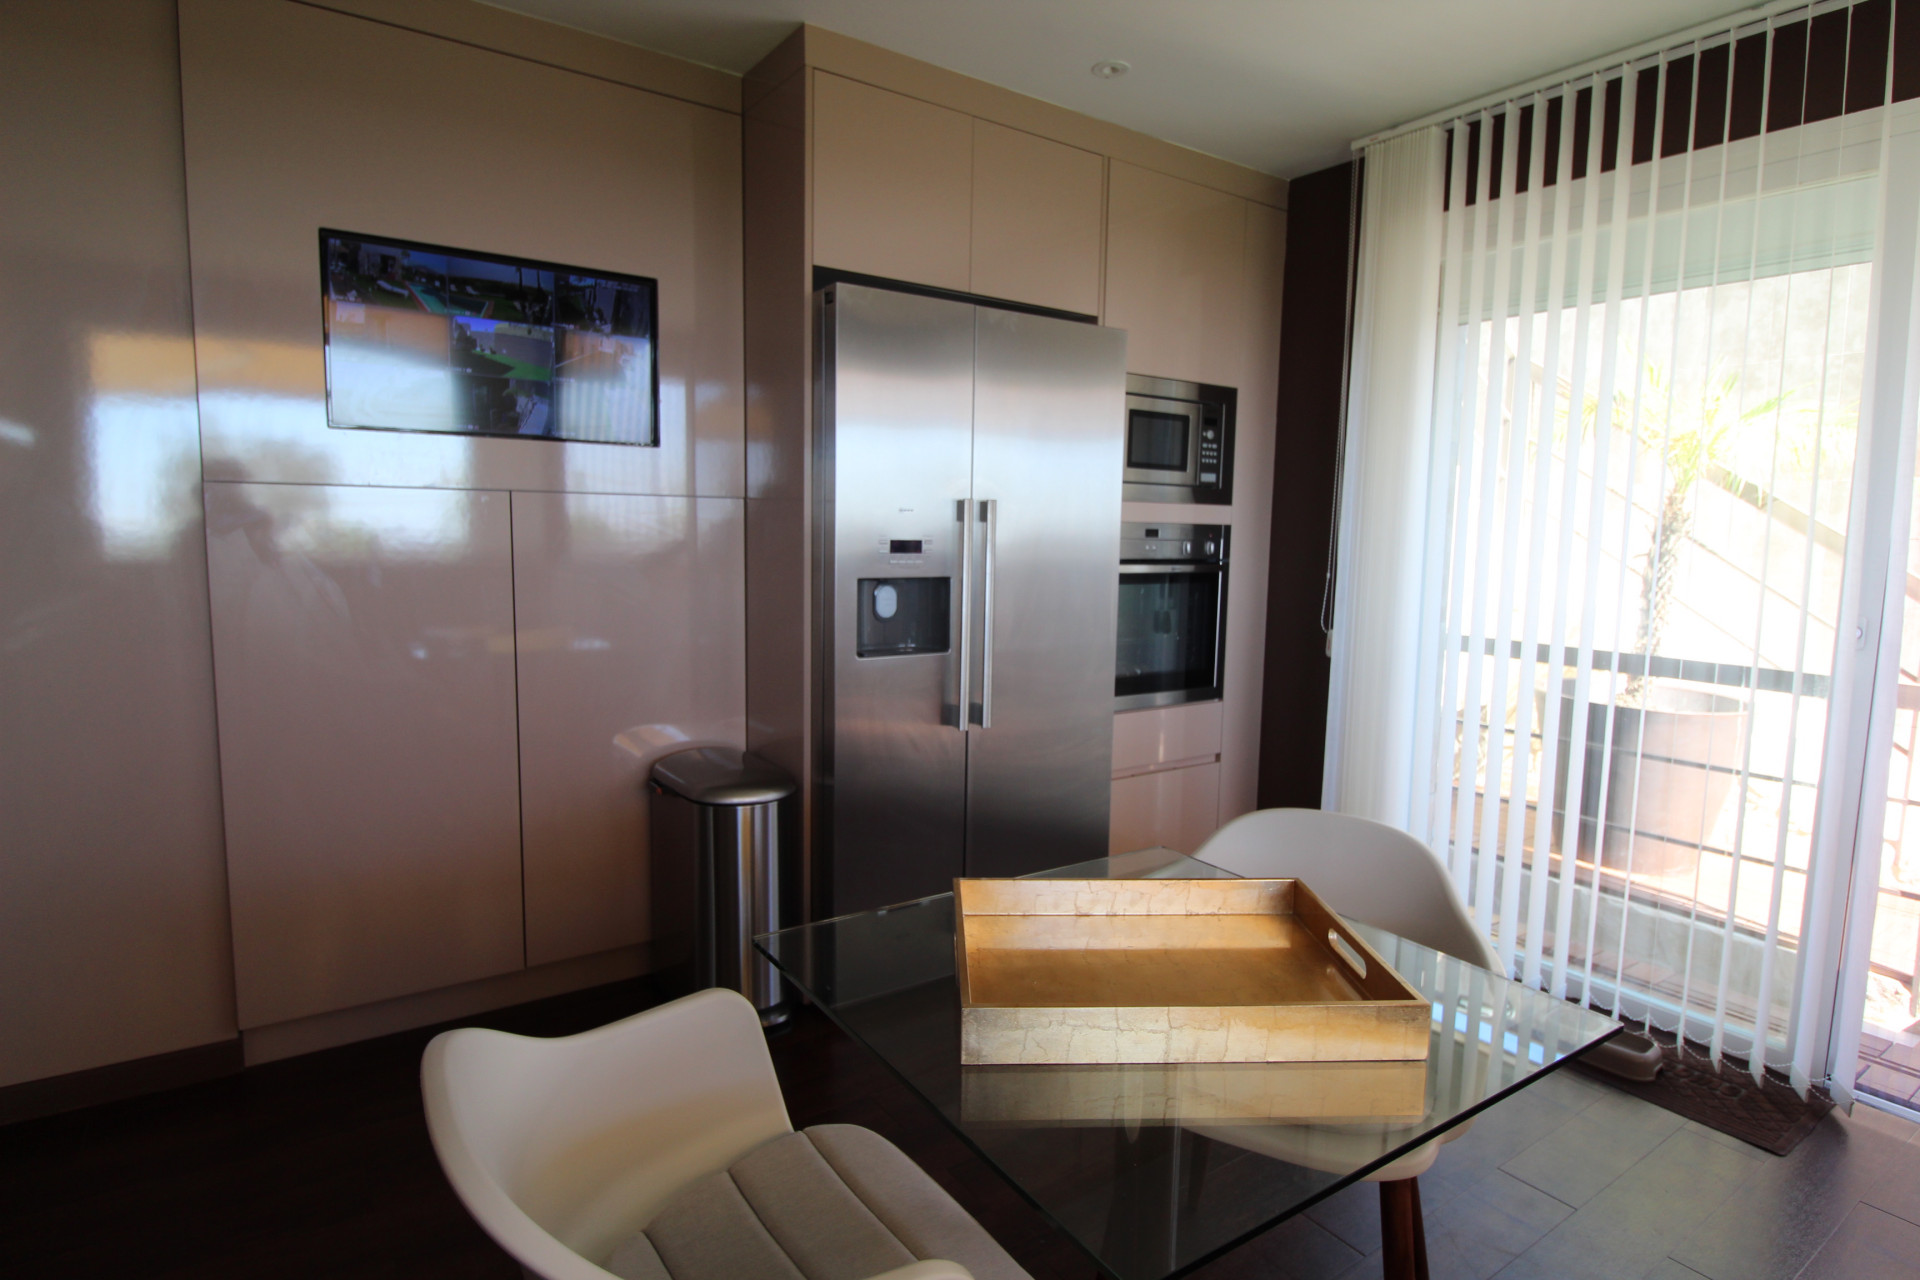 Brand new modern style first line golf villa for sale in Atalaya New Golden Mile in Estepona